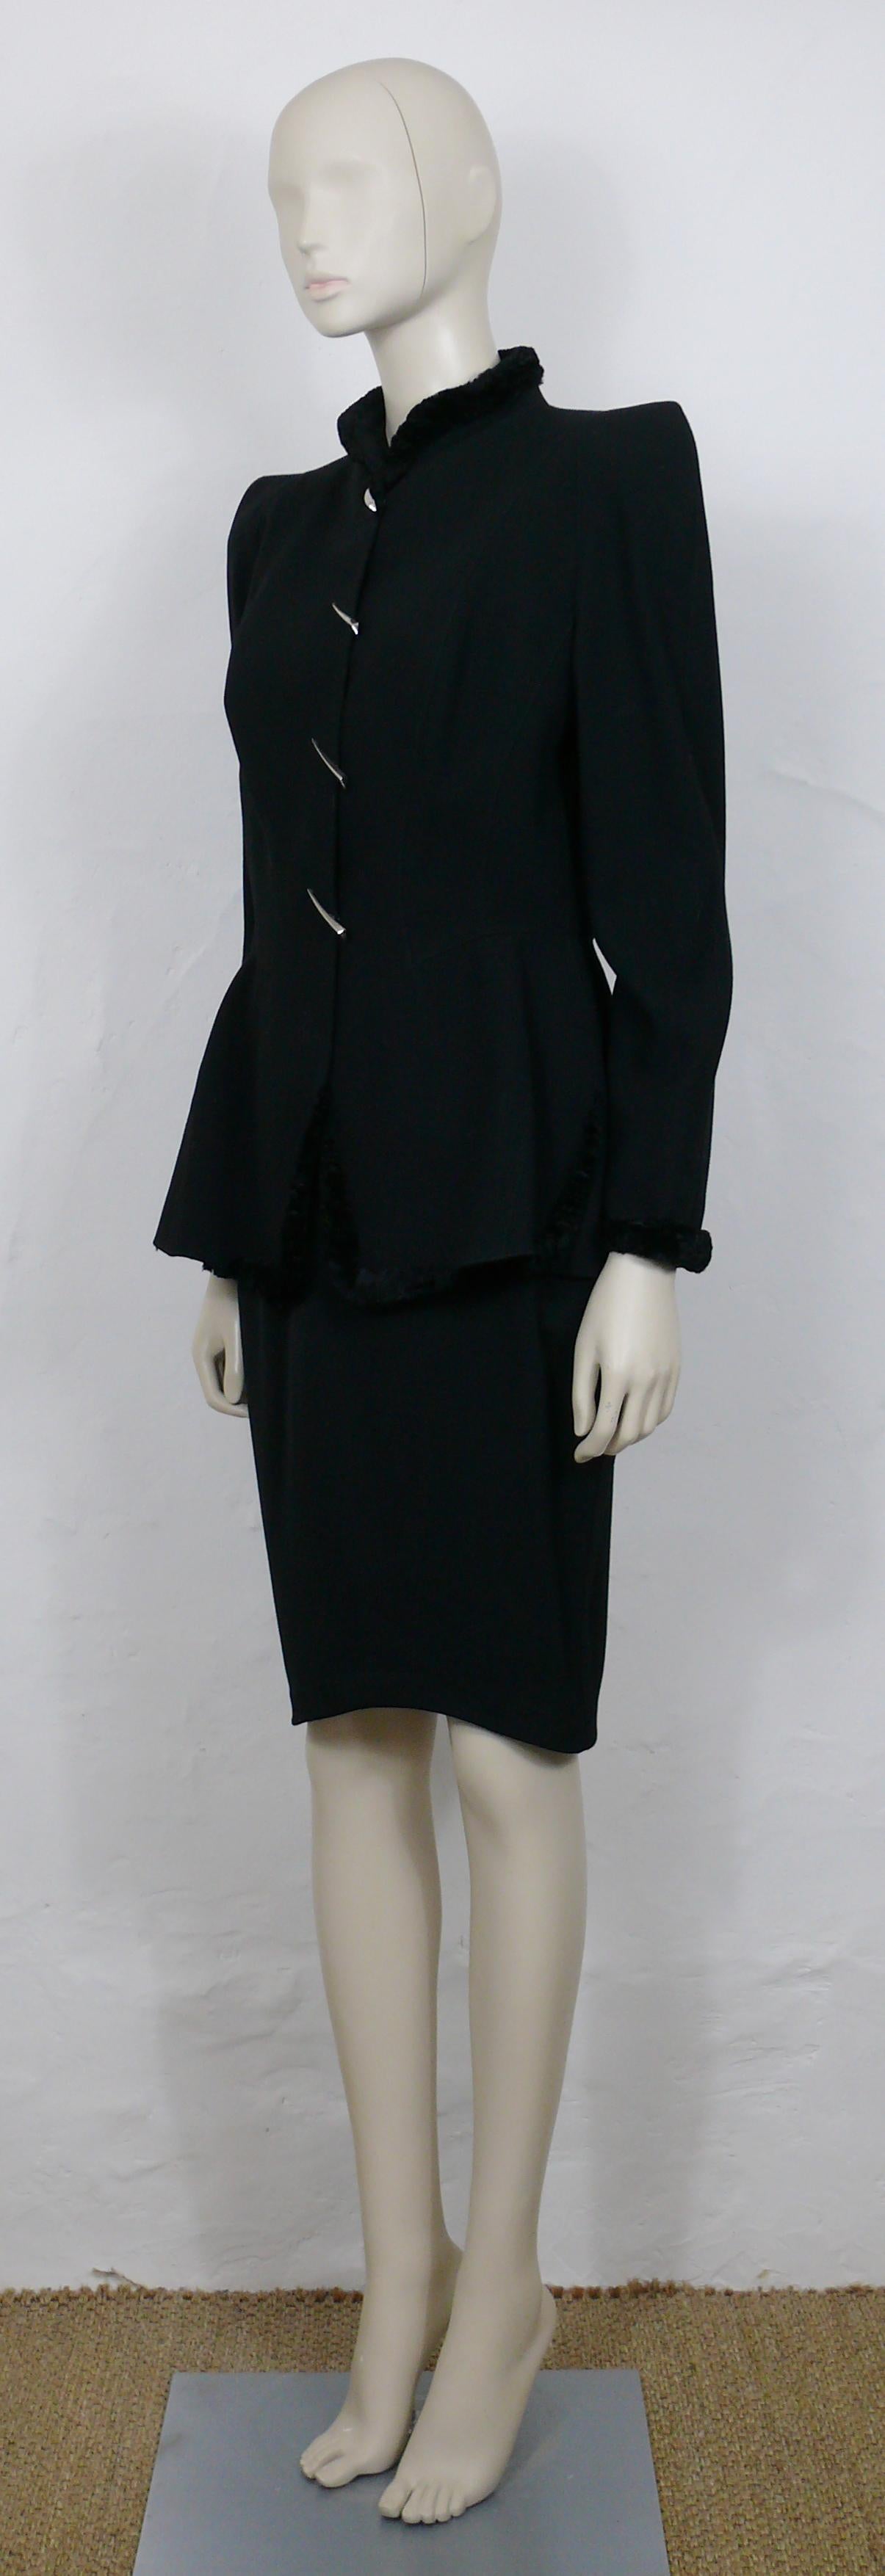 Thierry Mugler Vintage Black Wool & Claw Ornaments Skirt Suit For Sale 3